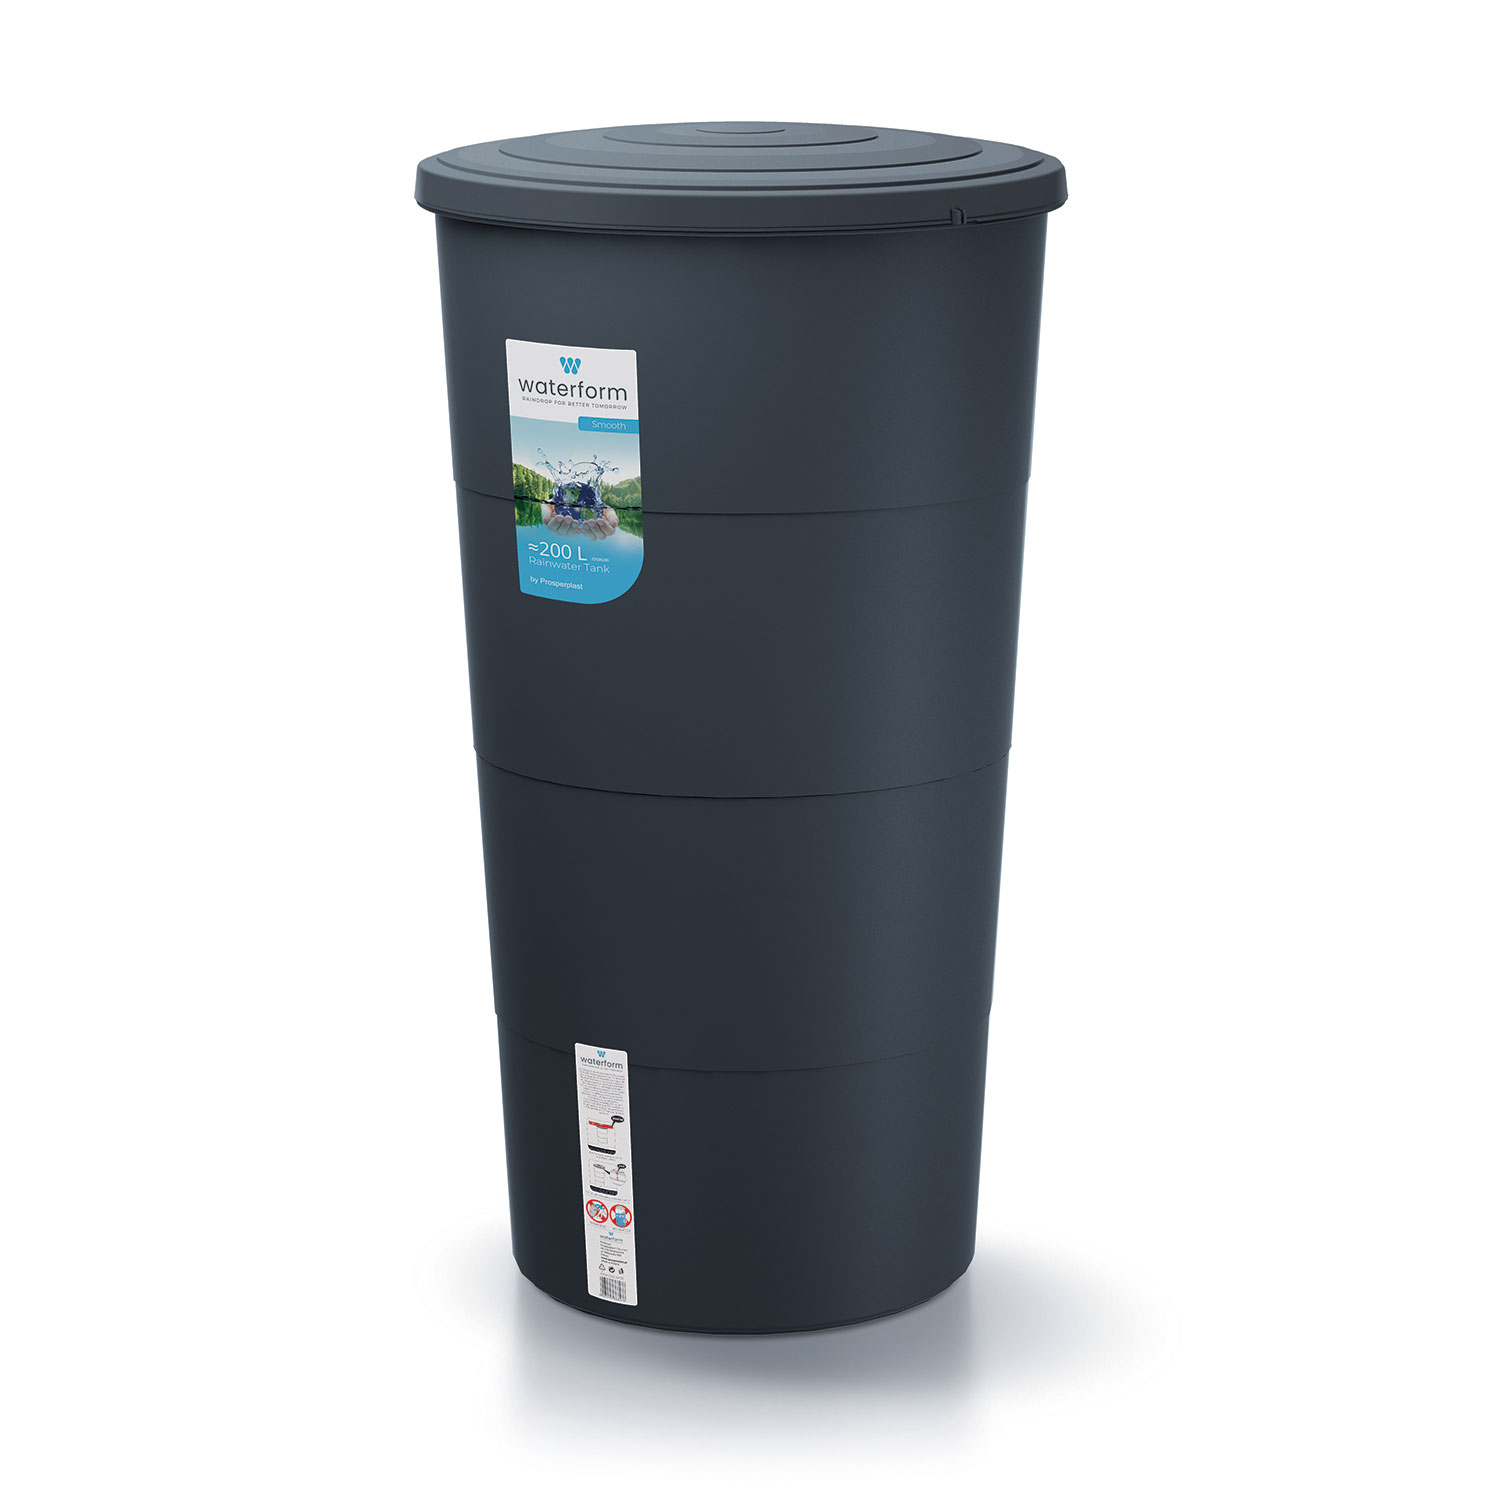 Waterform Smooth rainwater tank IDSM200 Anthracite